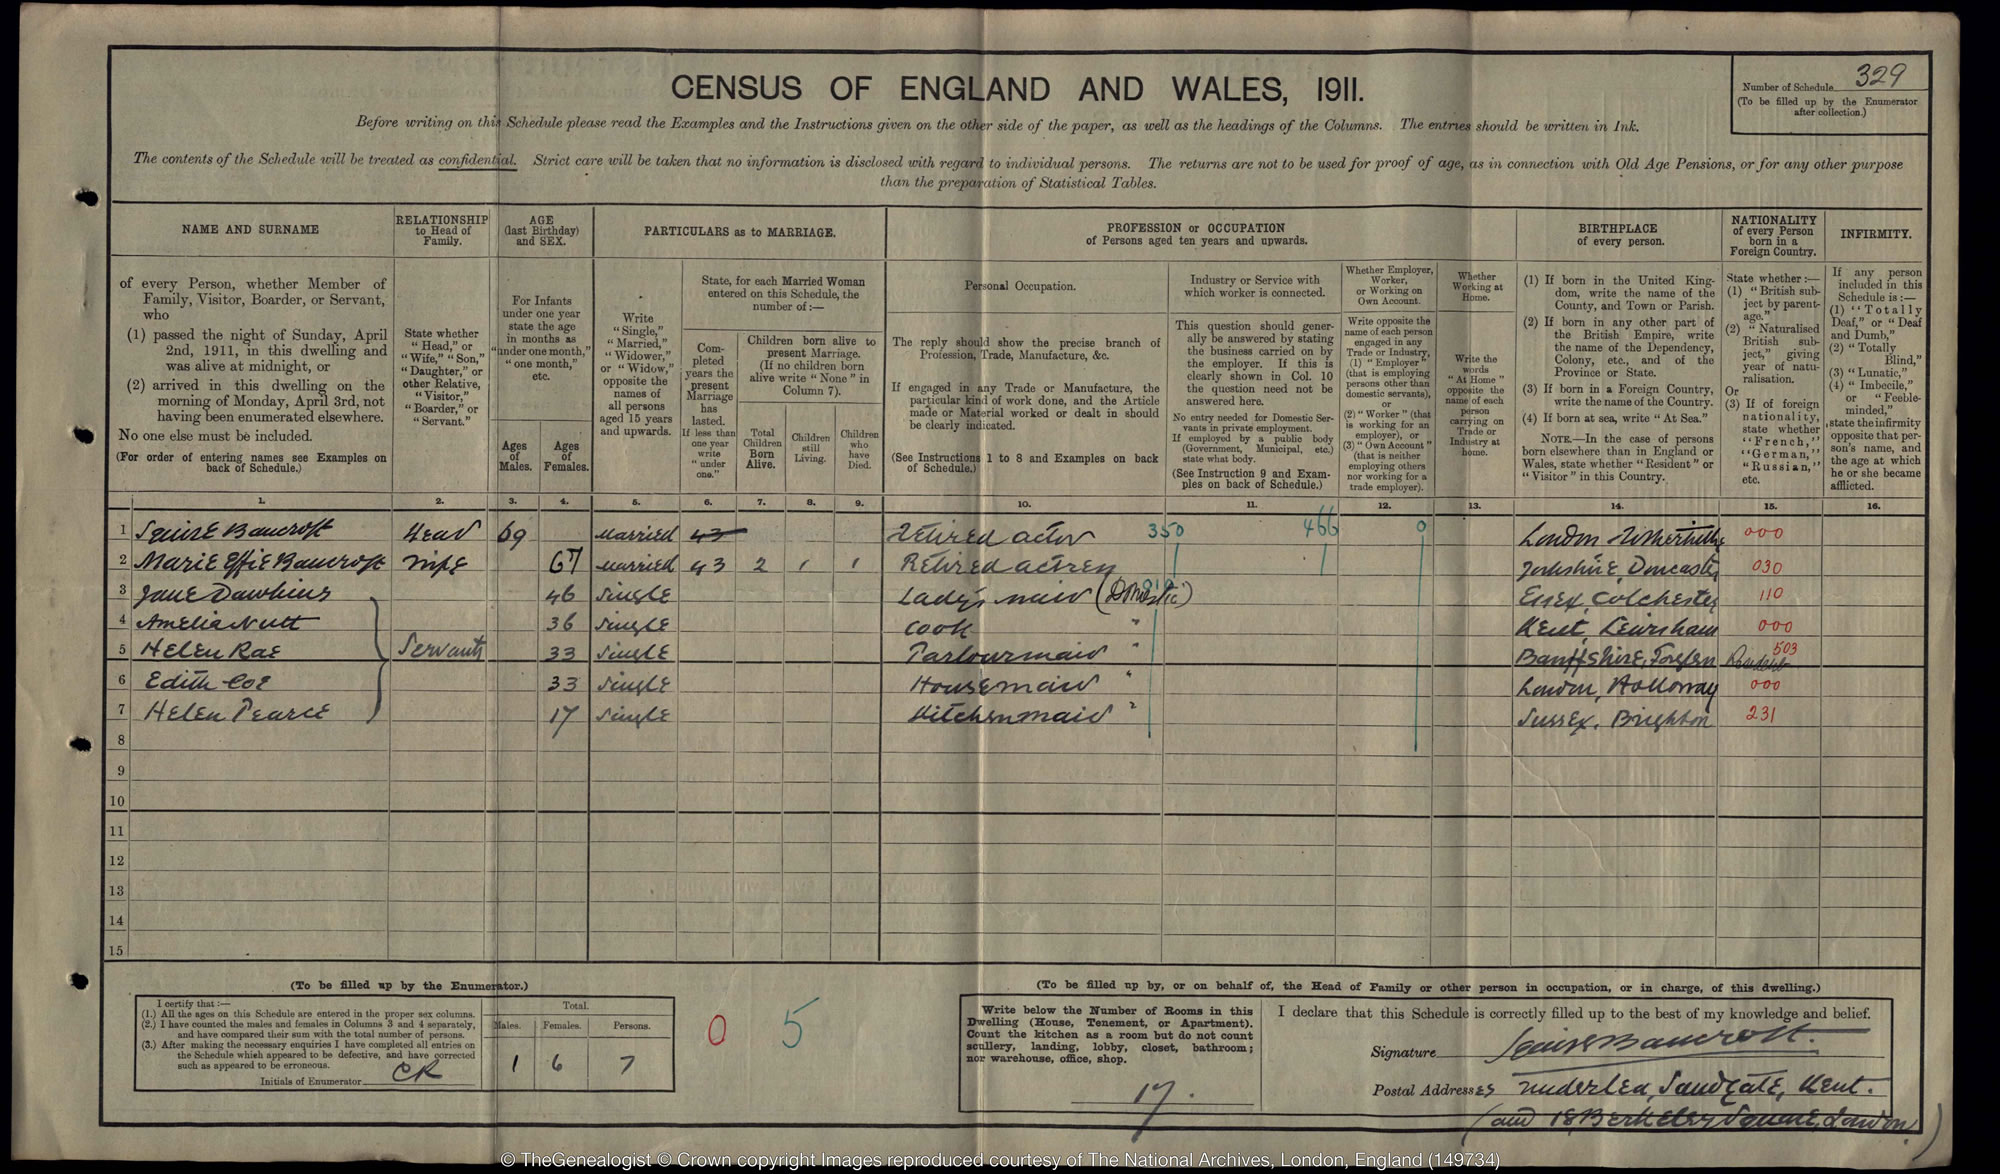 Handwritten details from the 1911 census image reveals the retired actors had two addresses